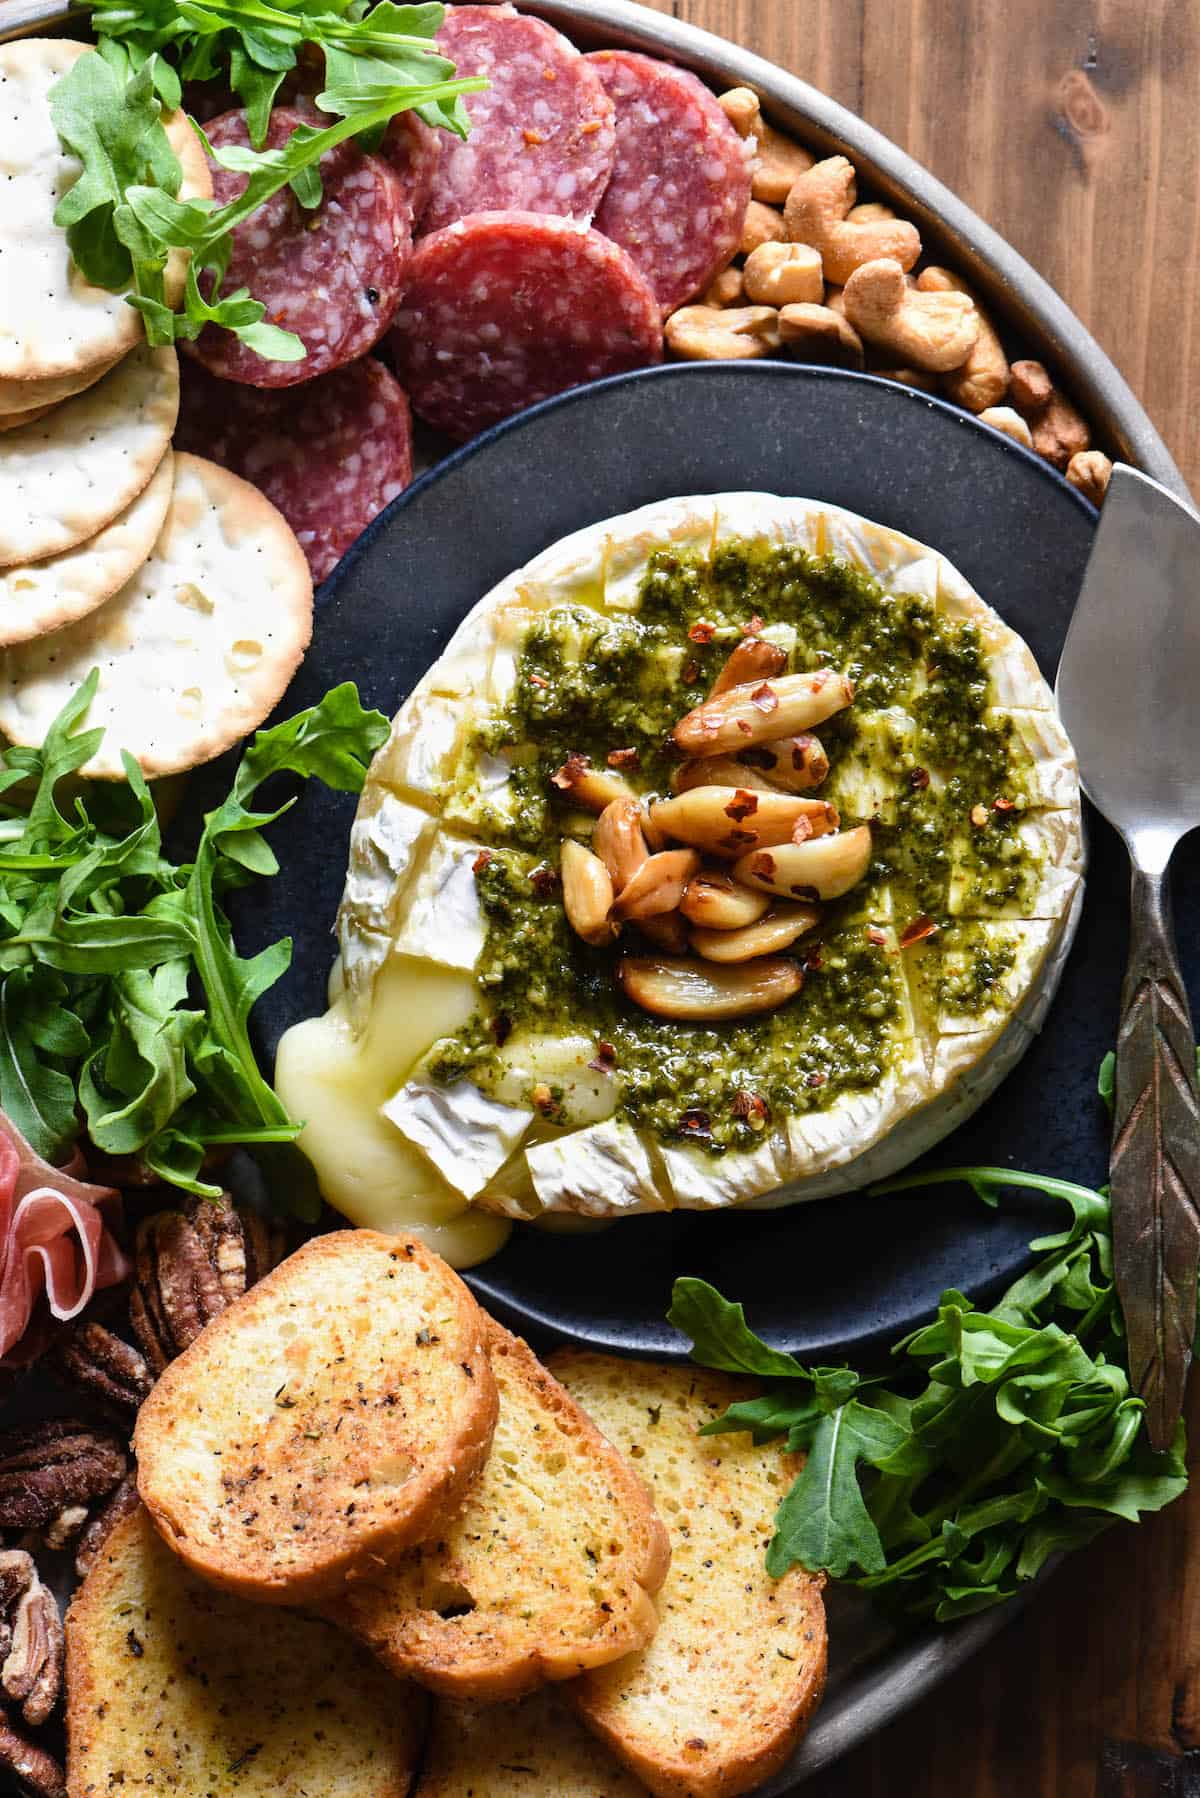 Everybody loves melted cheese, and this Savory Baked Brie takes it to the next level. Baked brie is topped with basil pesto and roasted garlic. | foxeslovelemons.com